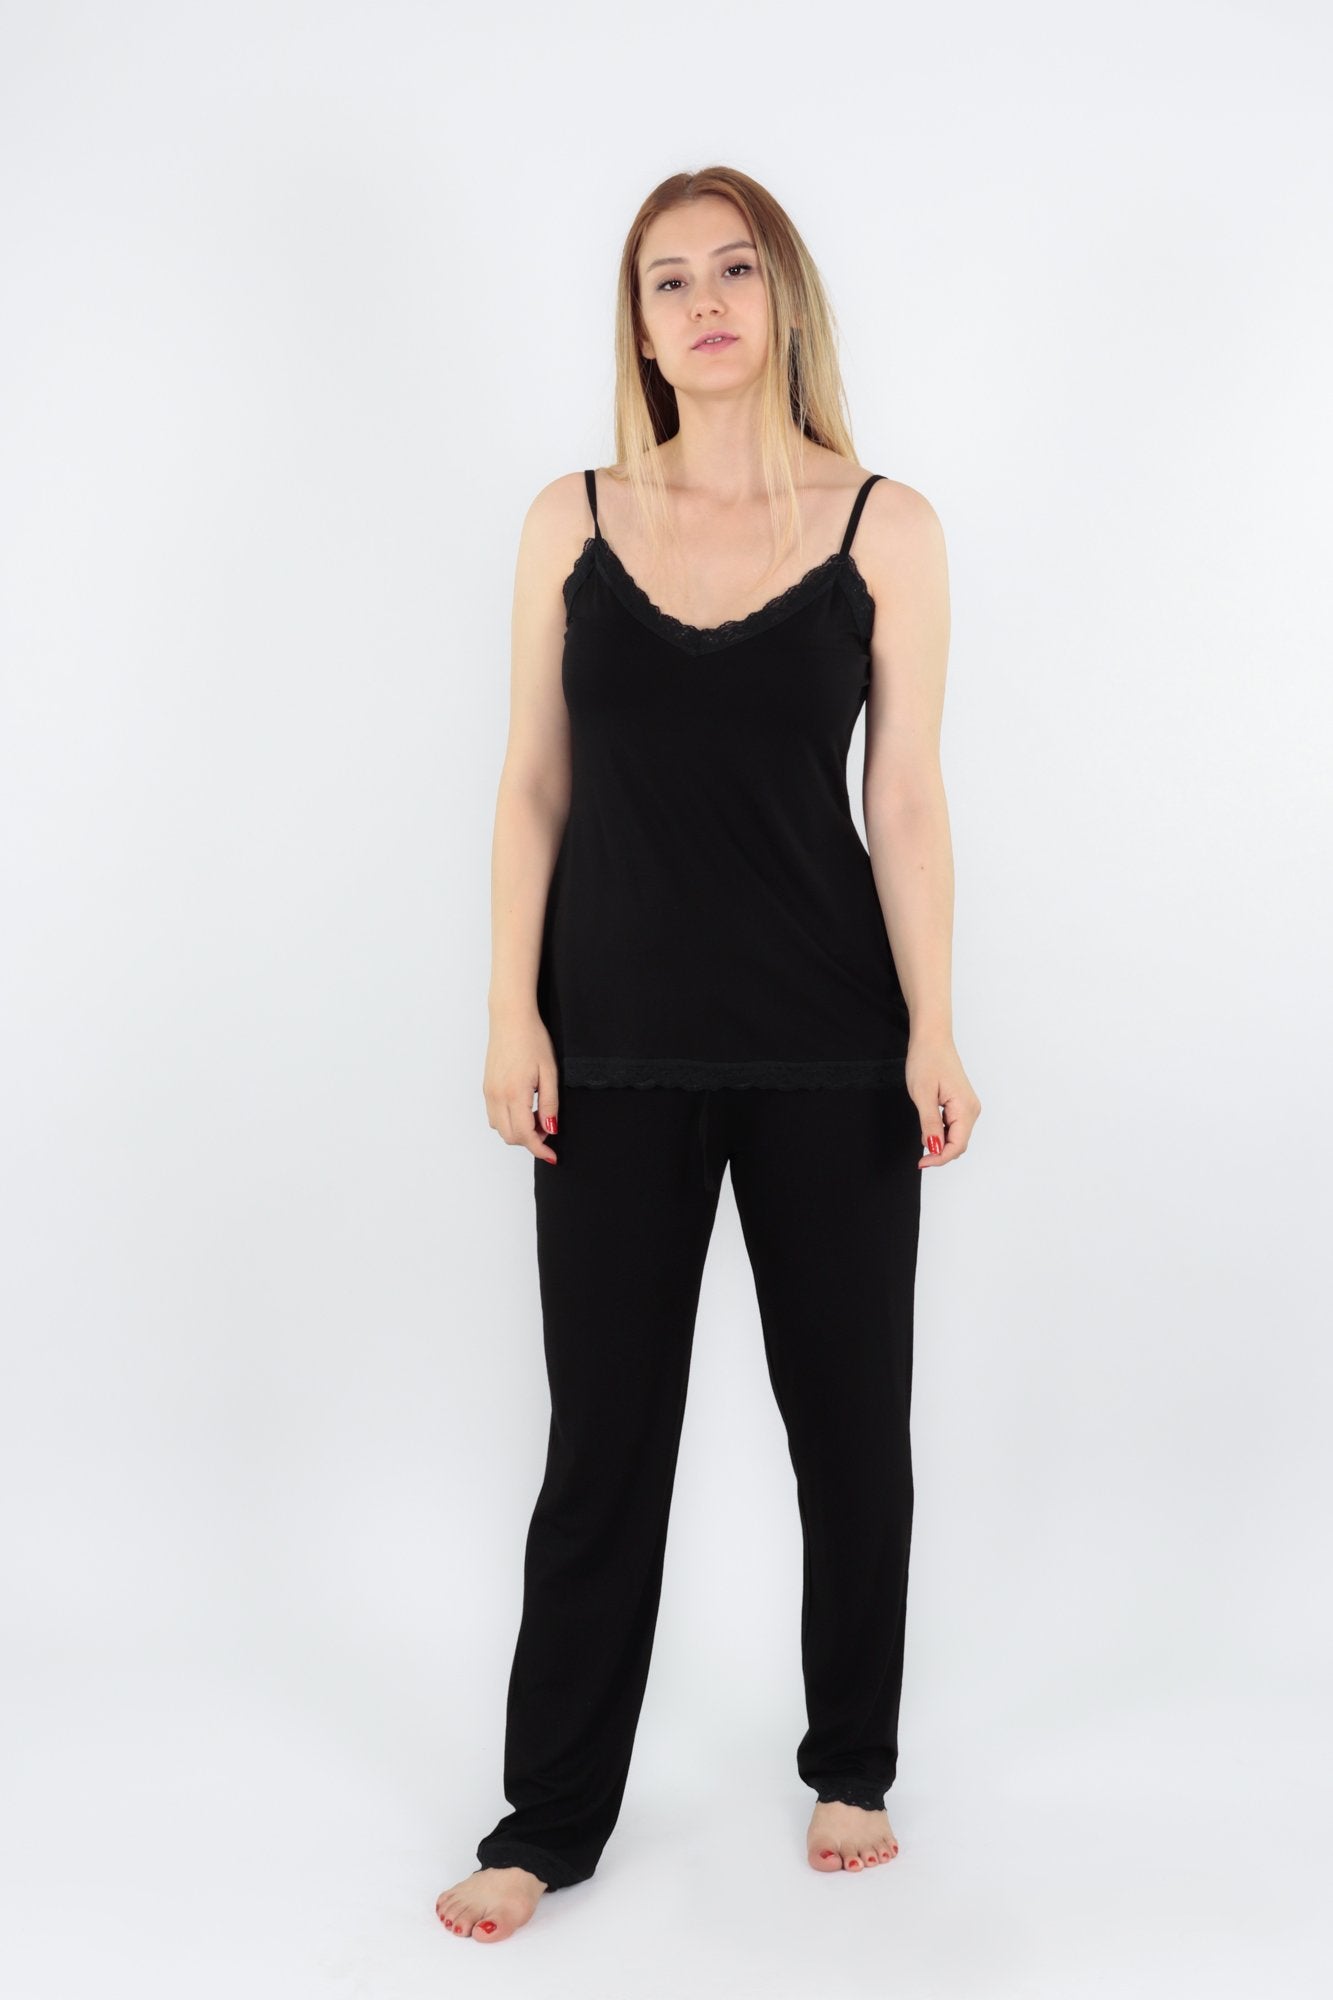 chassca singlet & pant pyjama set with lace detail - Breakmood